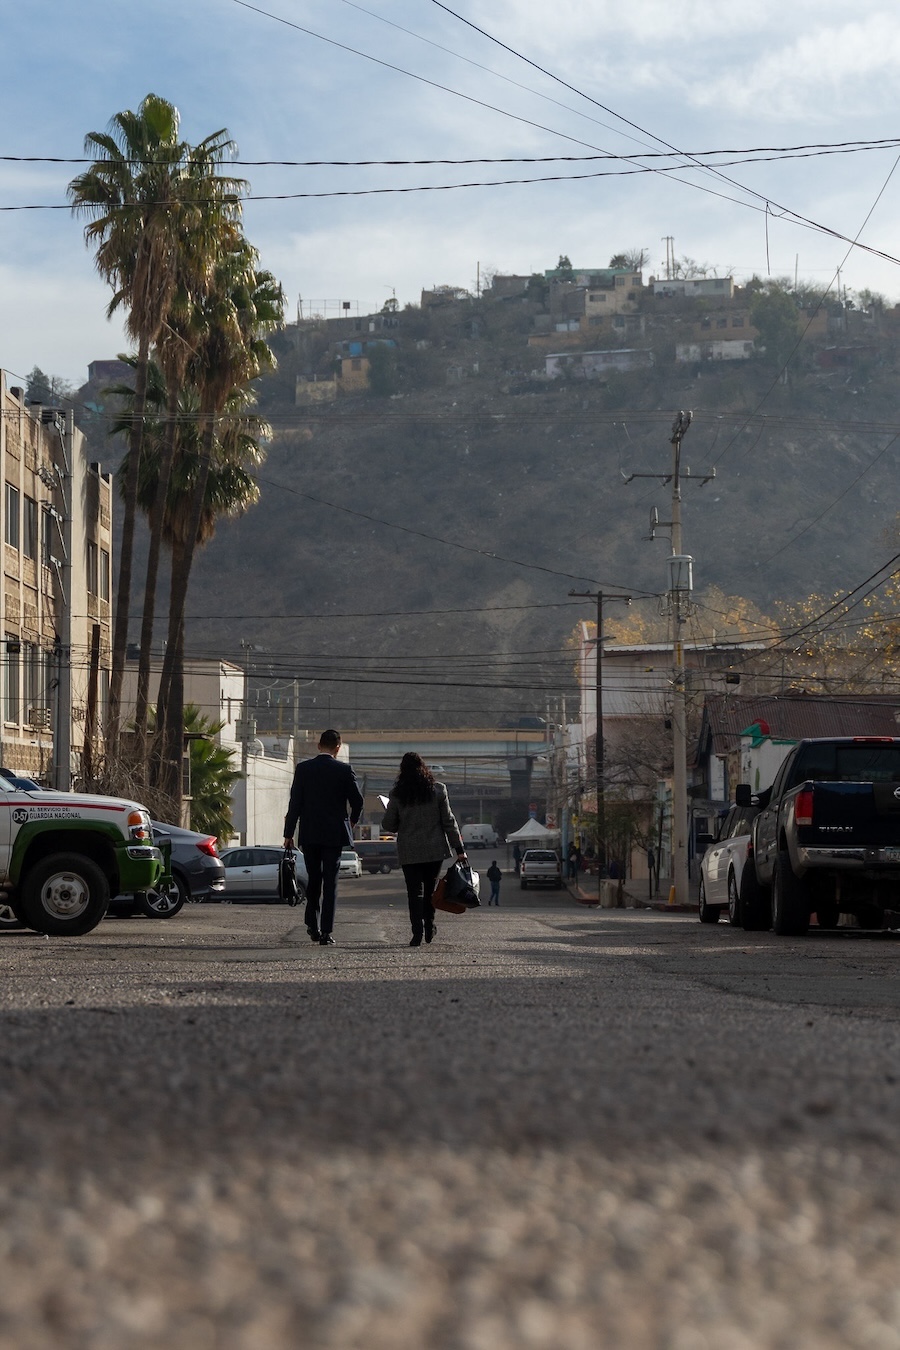 Bill De La Rosa and his mother, Gloria, walk the streets of Nogales as they head to the border